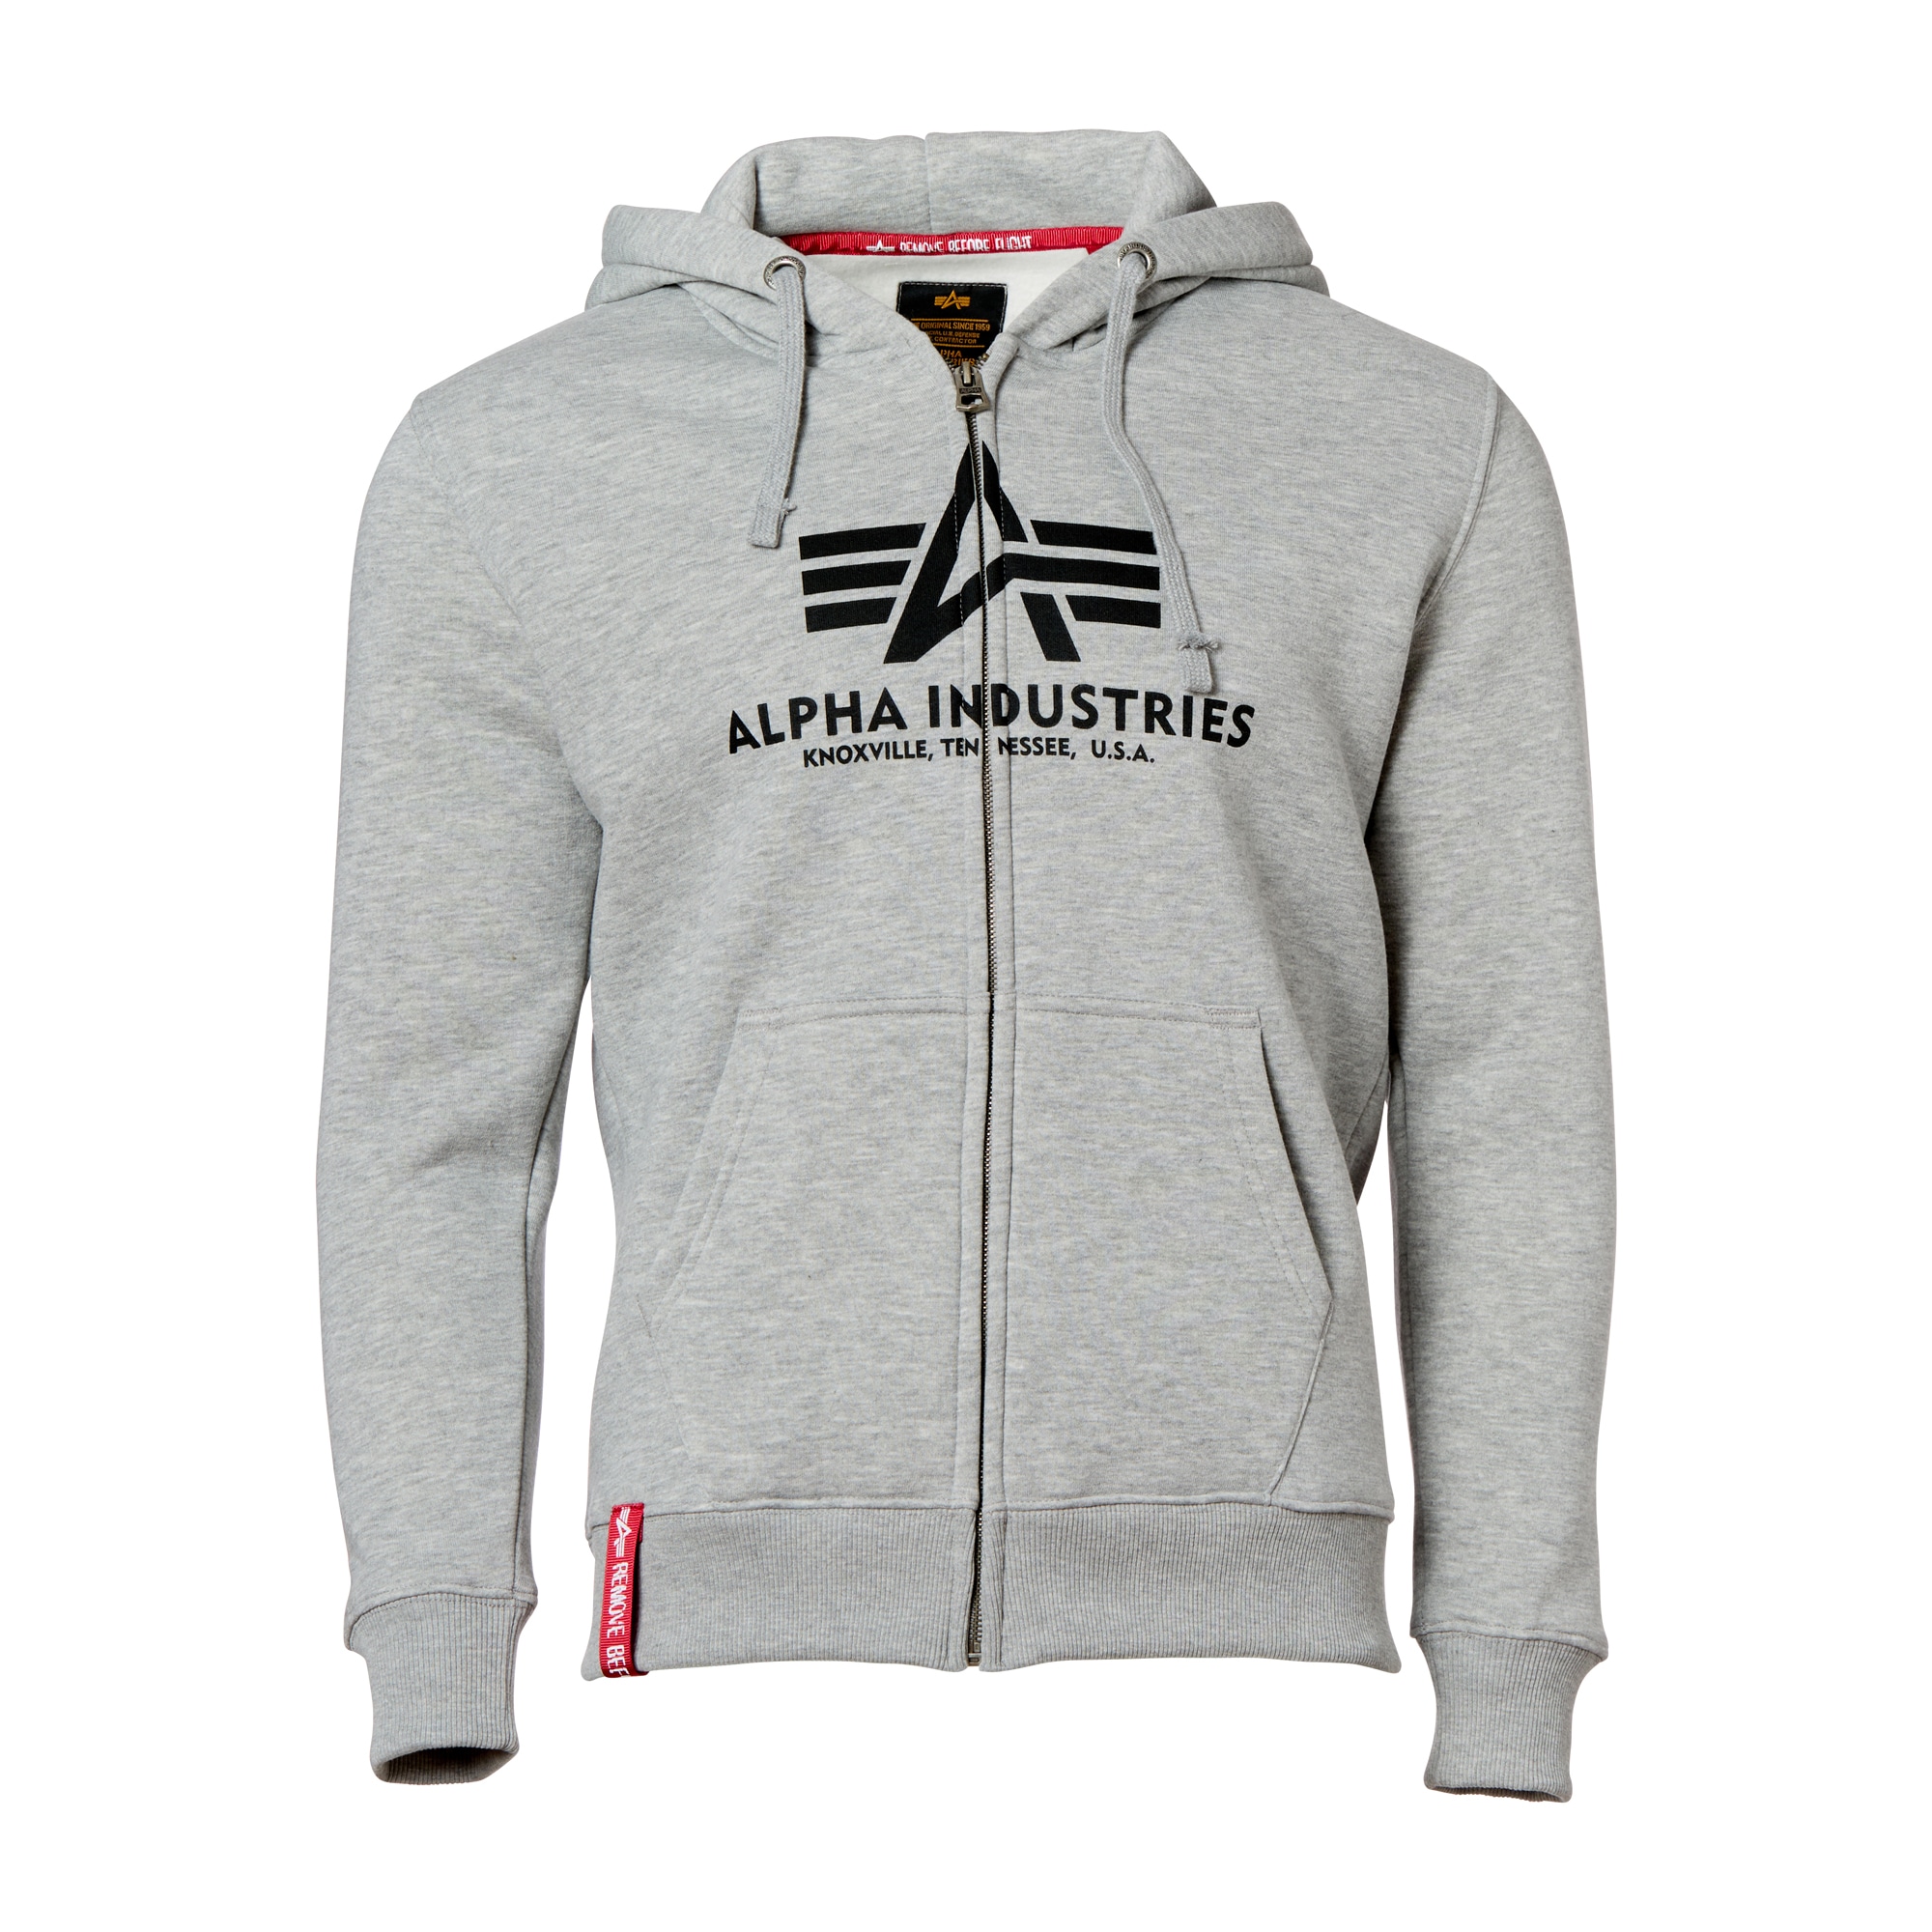 Purchase the Alpha Industries Hoodie heather by grey Zip A Basic